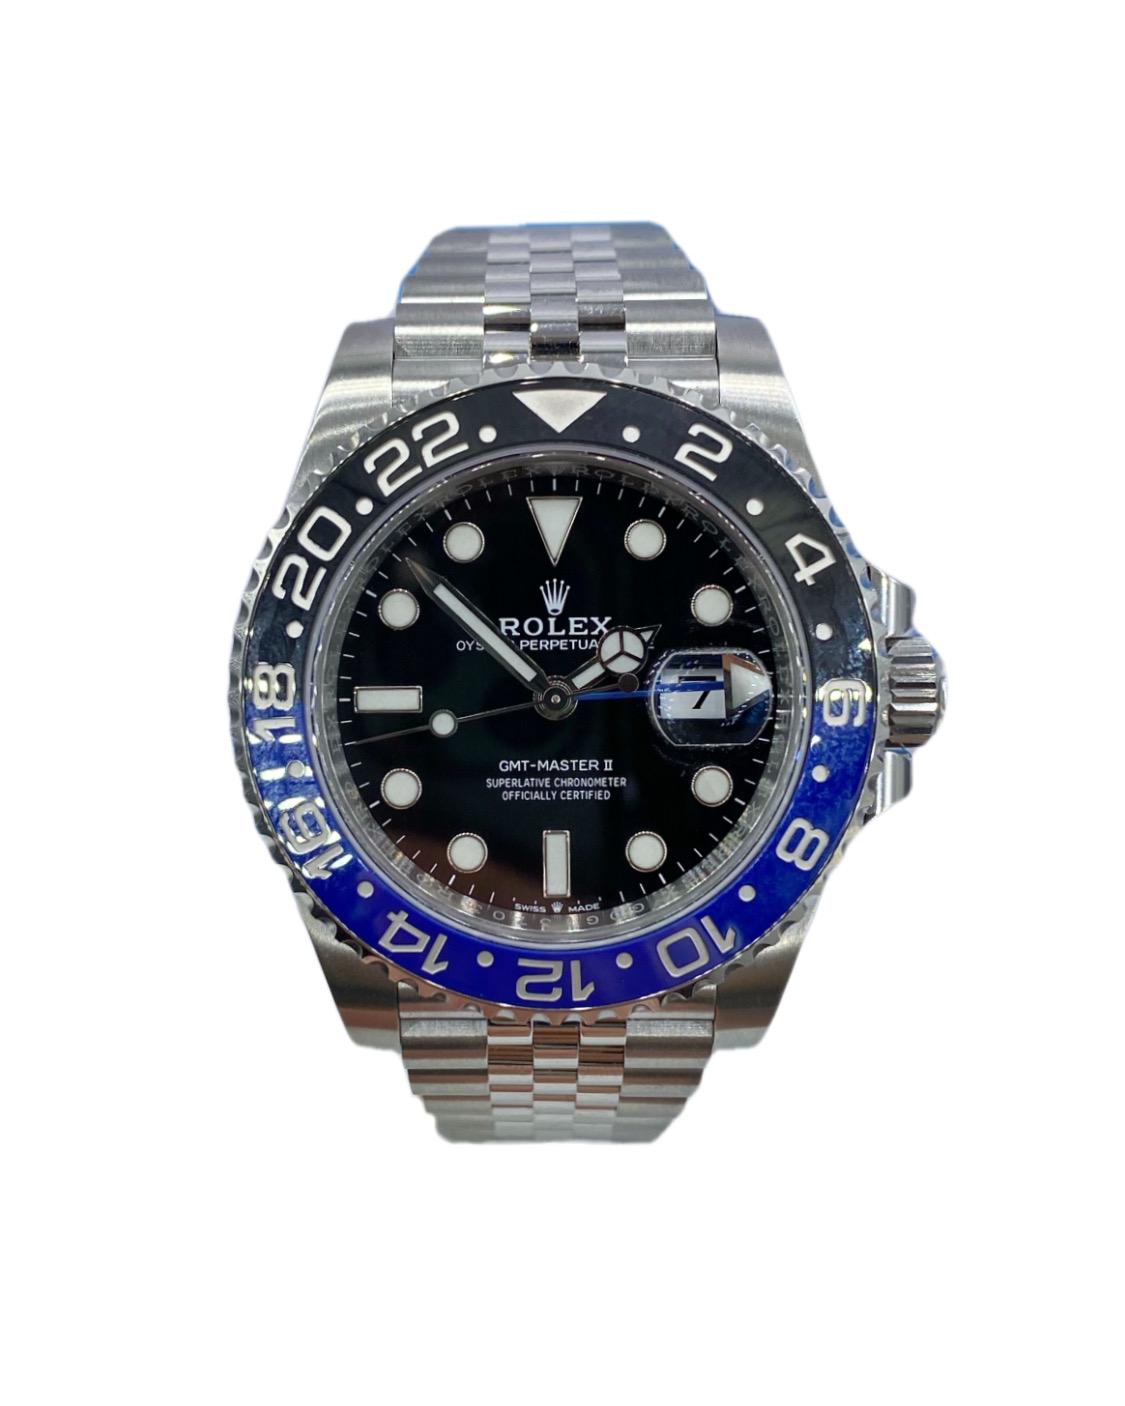 The Rolex GMT-Master II 126710BLNR men's watch. Also known as the Rolex Batman Jubilee. Featuring a brushed and polished 904L Oystersteel stainless steel case and Jubilee bracelet. The date is viewable through a cyclops lens at 3 o'clock. The